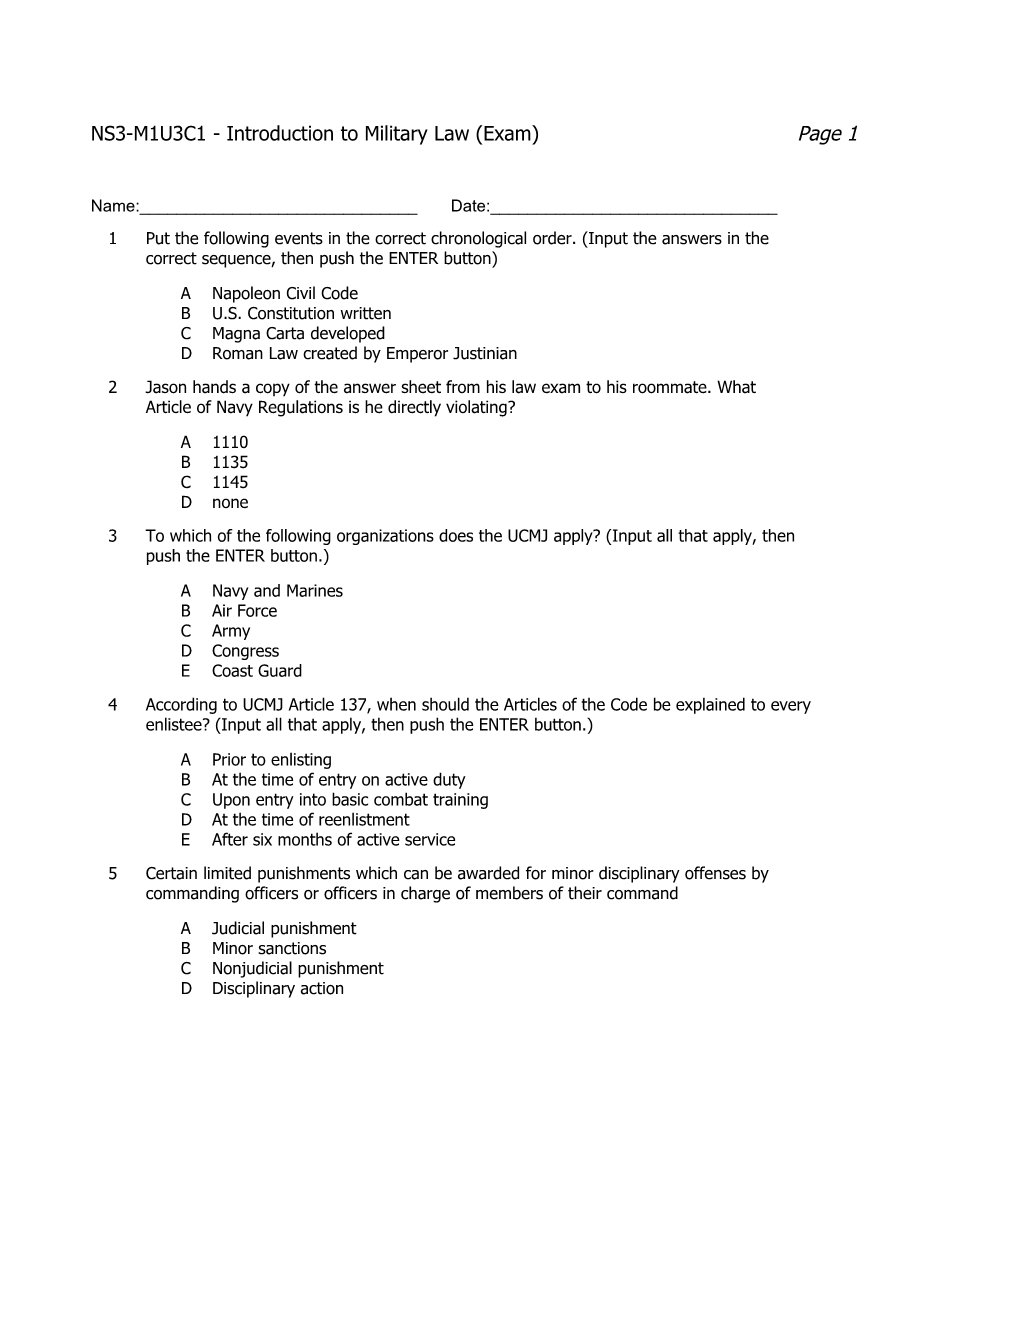 NS3-M1U3C1 - Introduction to Military Law (Exam) Page 1